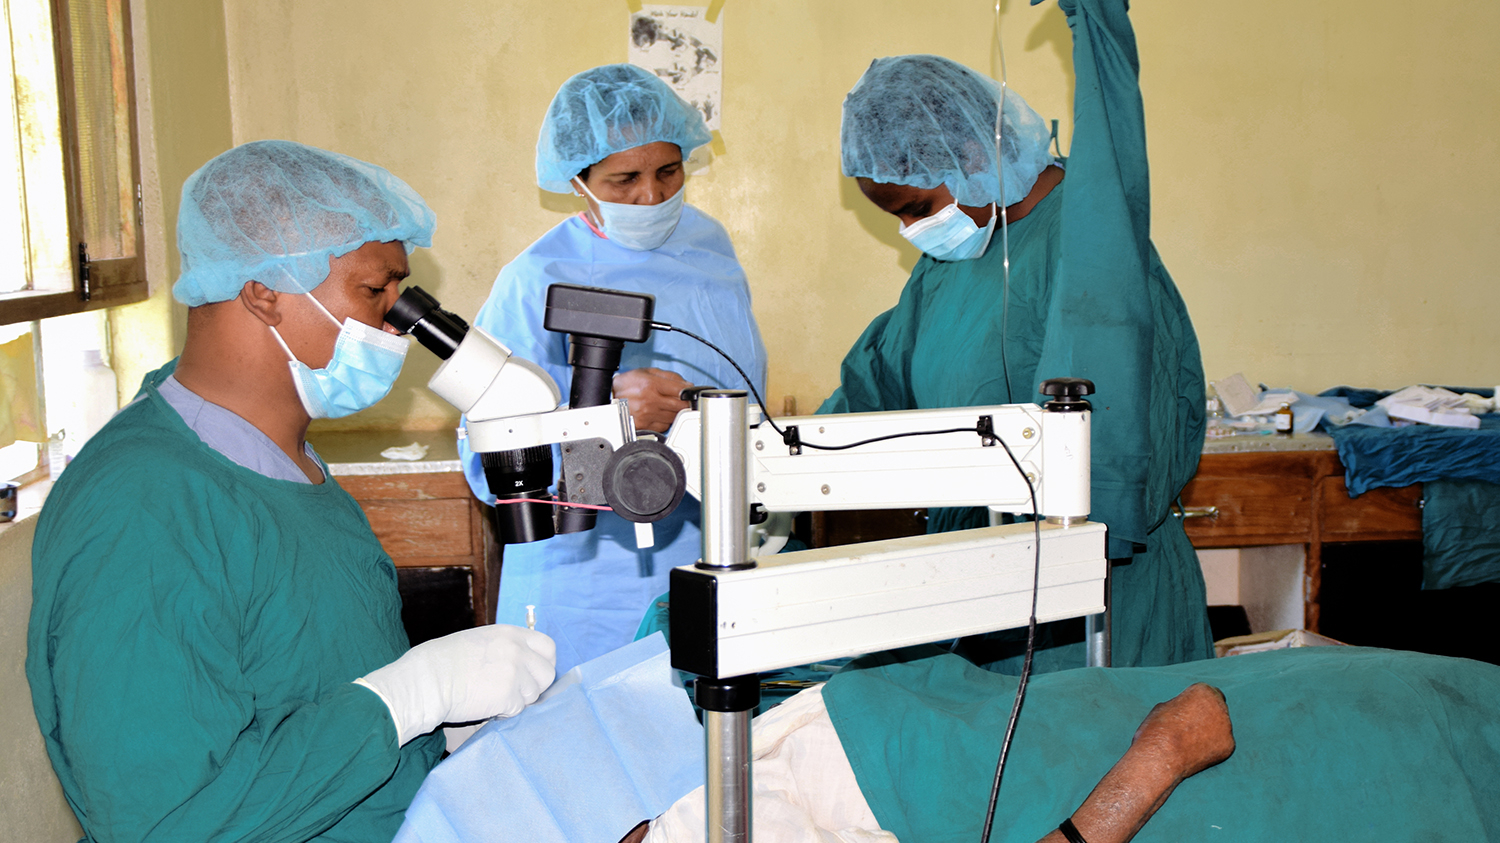 A surgeon performs cataract surgery on a patient, assisted by two eye care workers.